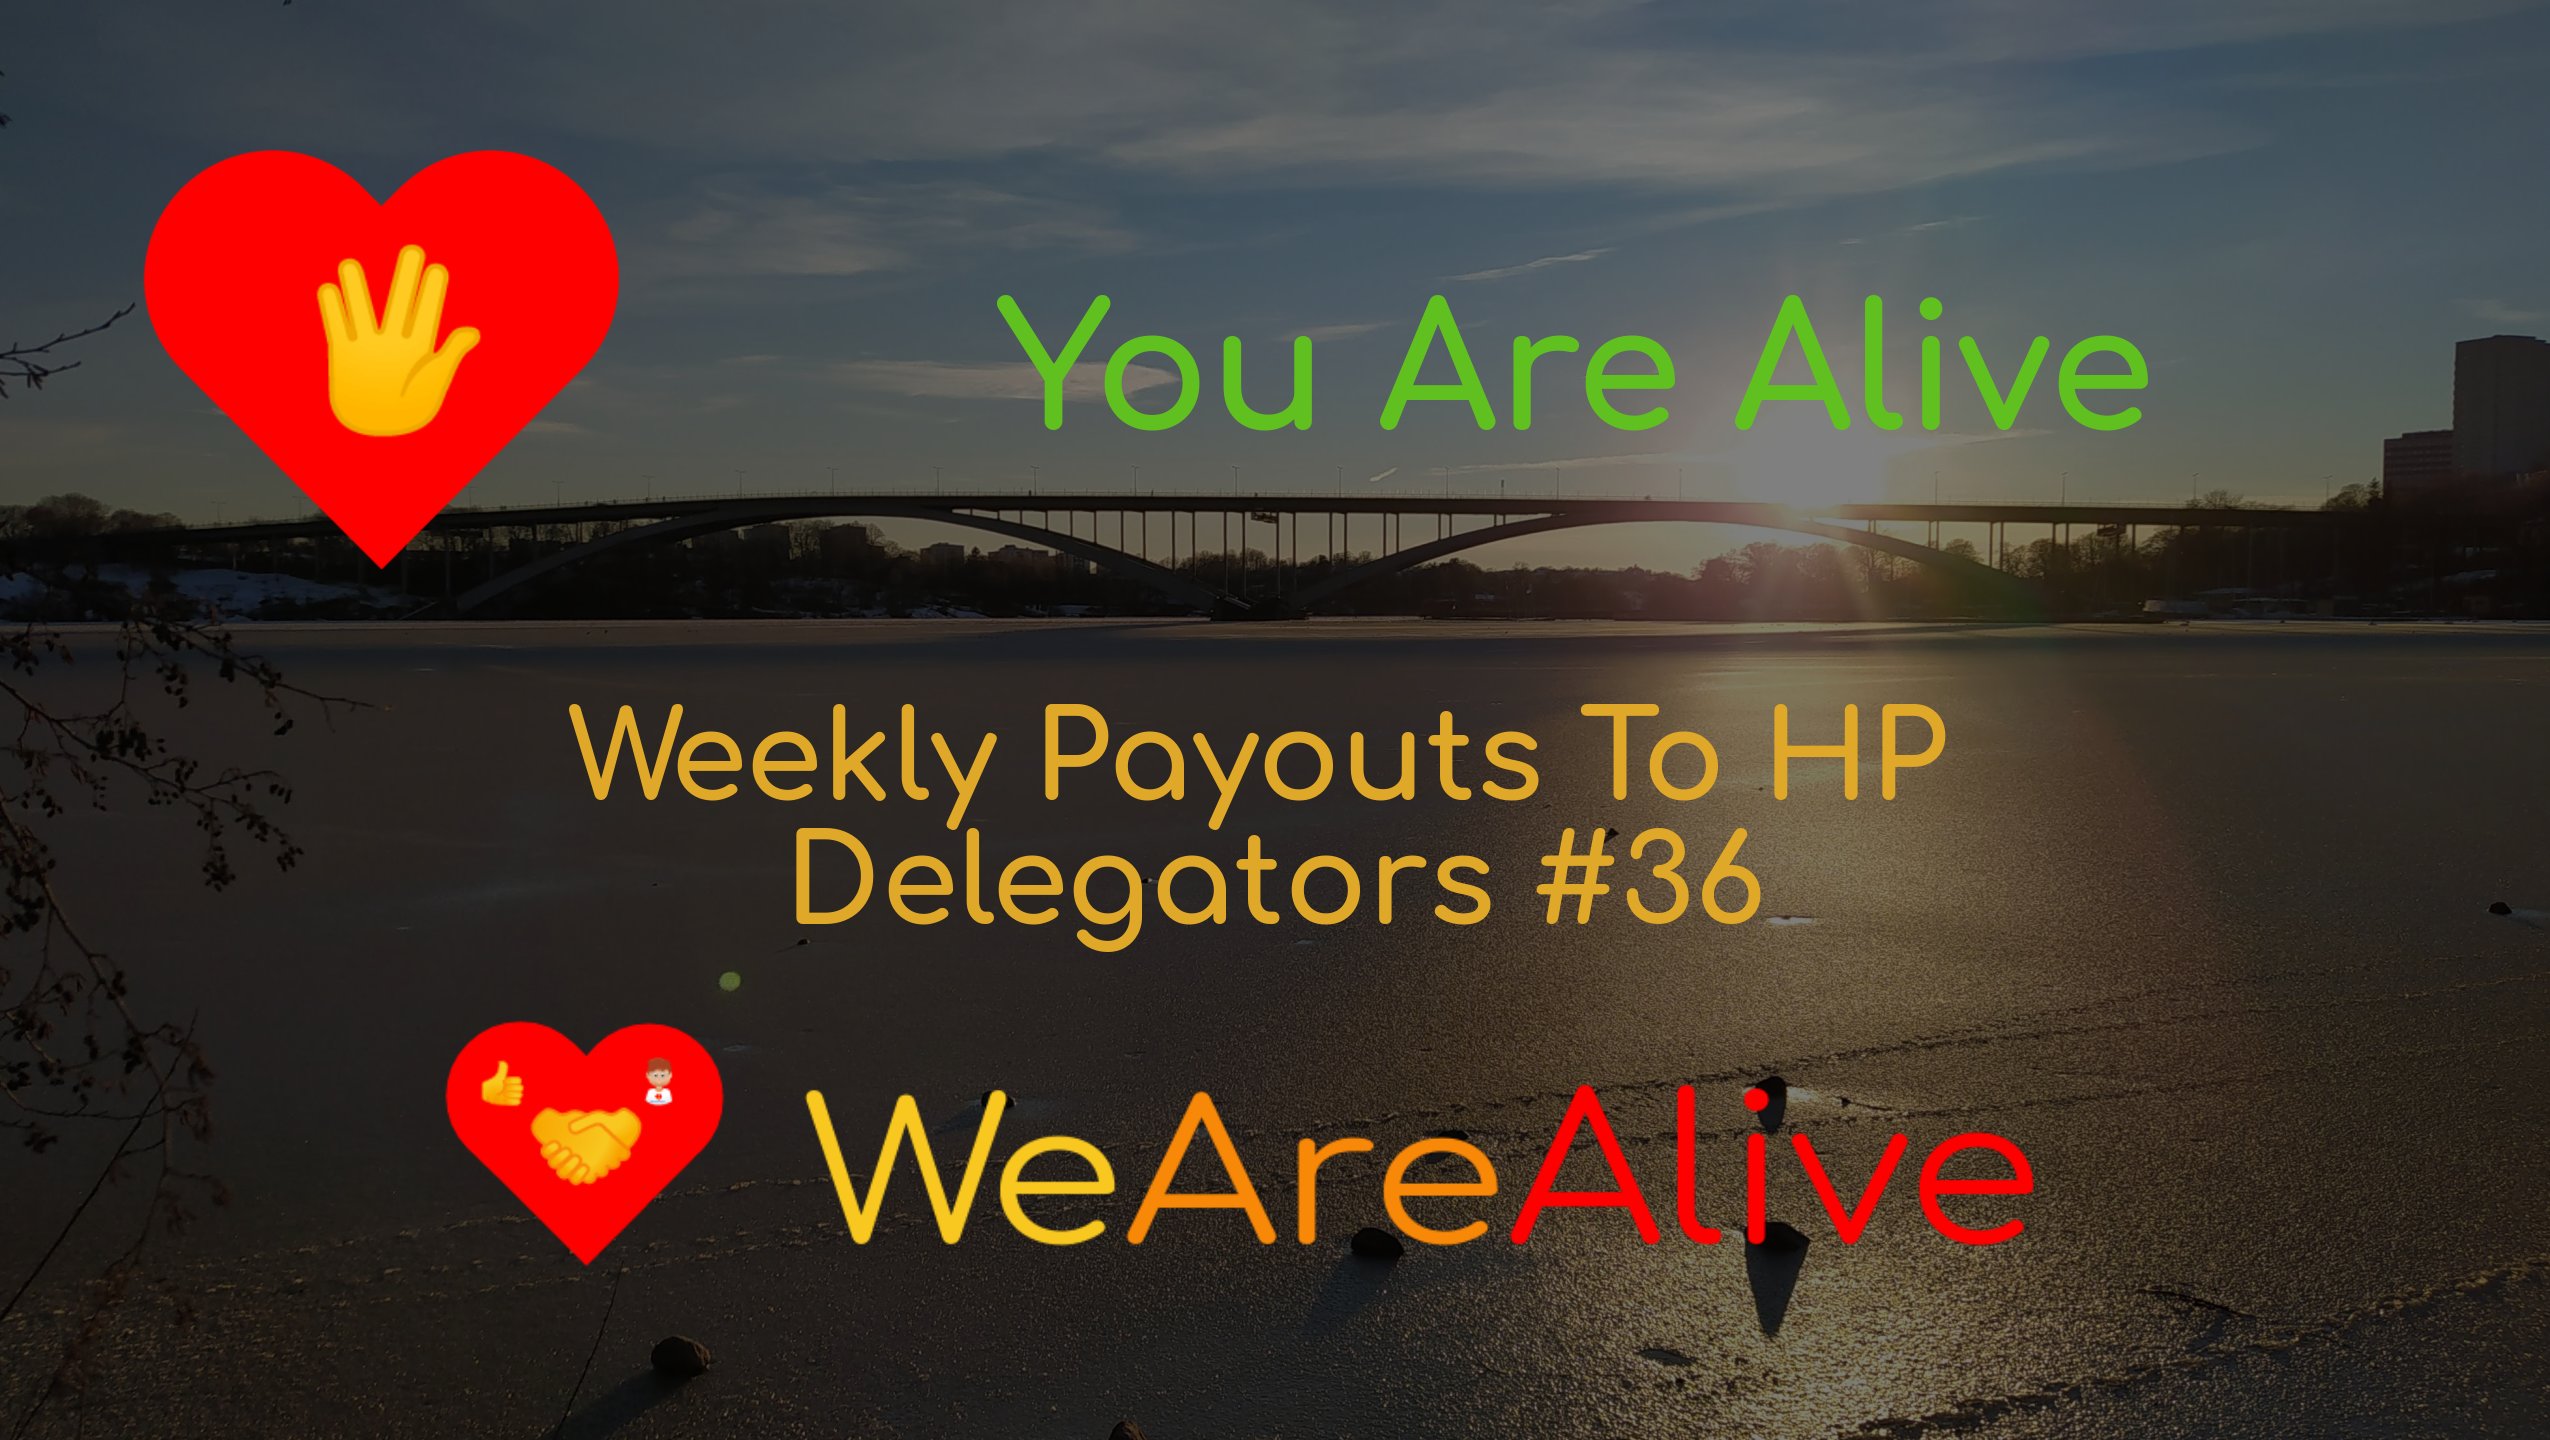 @youarealive/you-are-alive-weekly-payouts-to-hp-and-rc-delegators-36